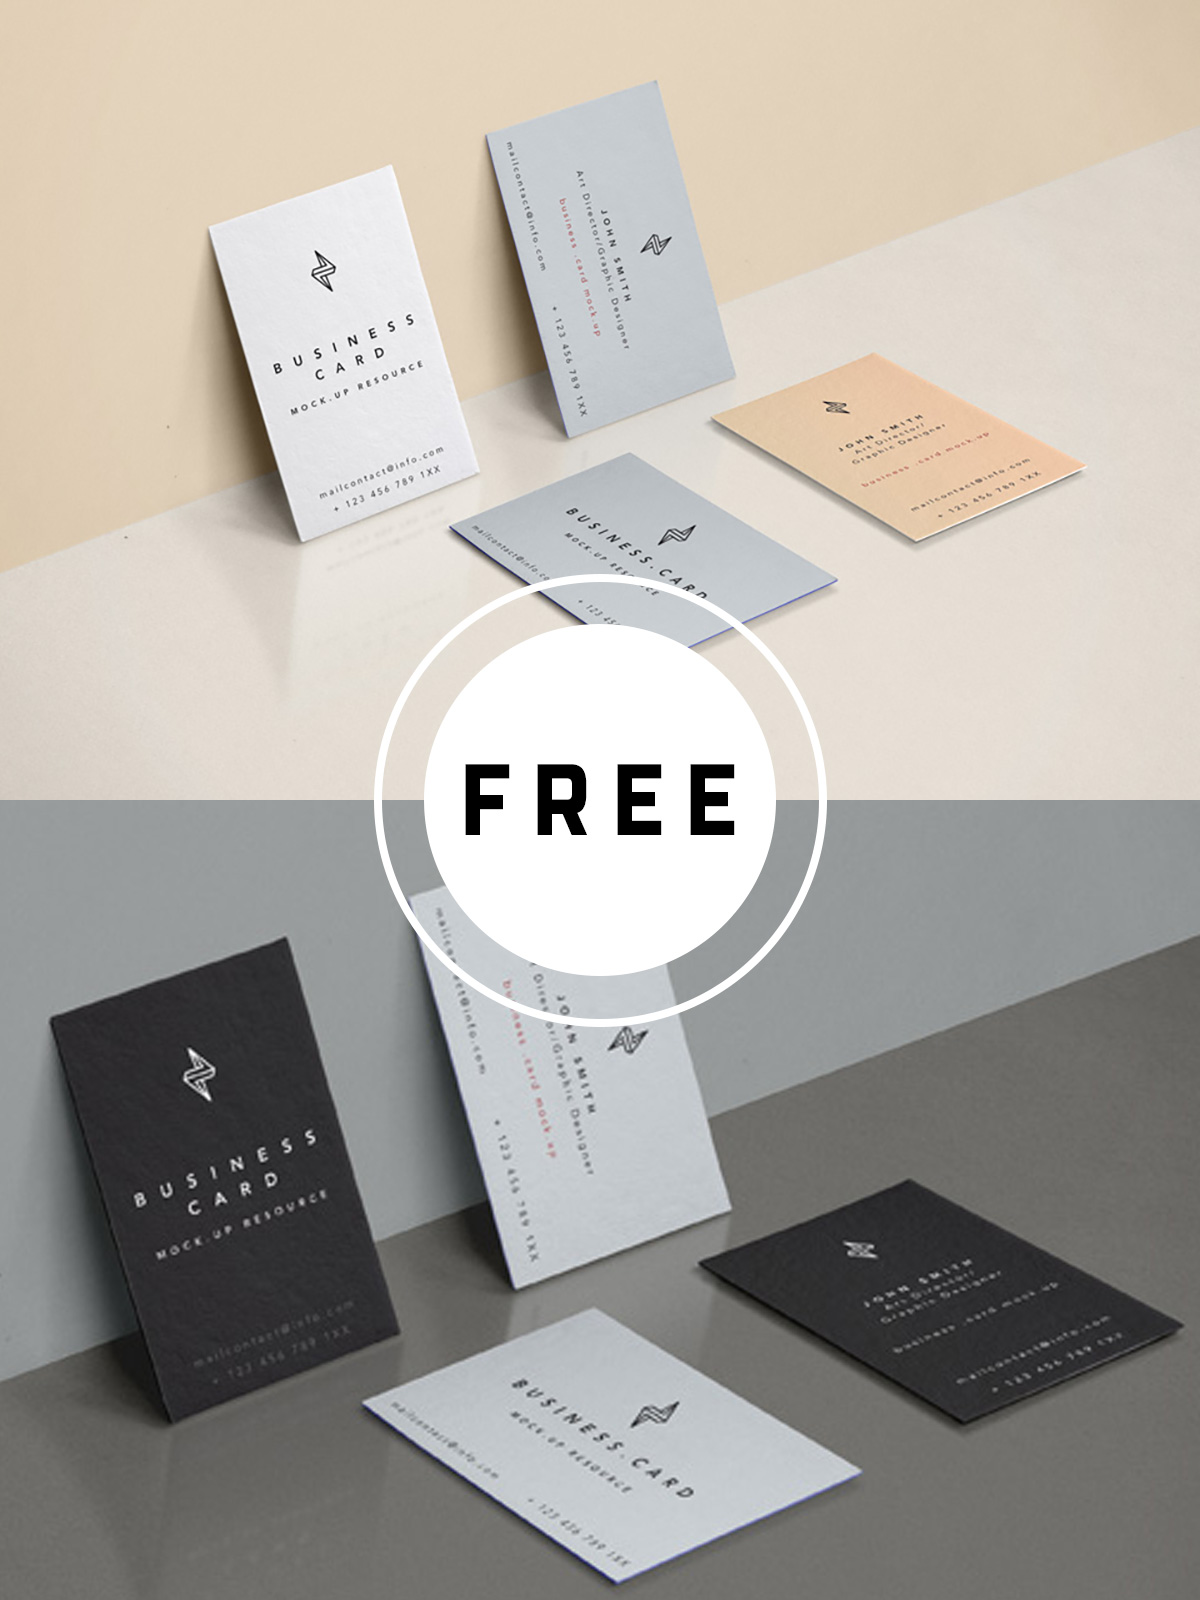 Download 80 Great Free Business Card Mockups Templates That You Can Download Page 5 Of 6 Creativetacos